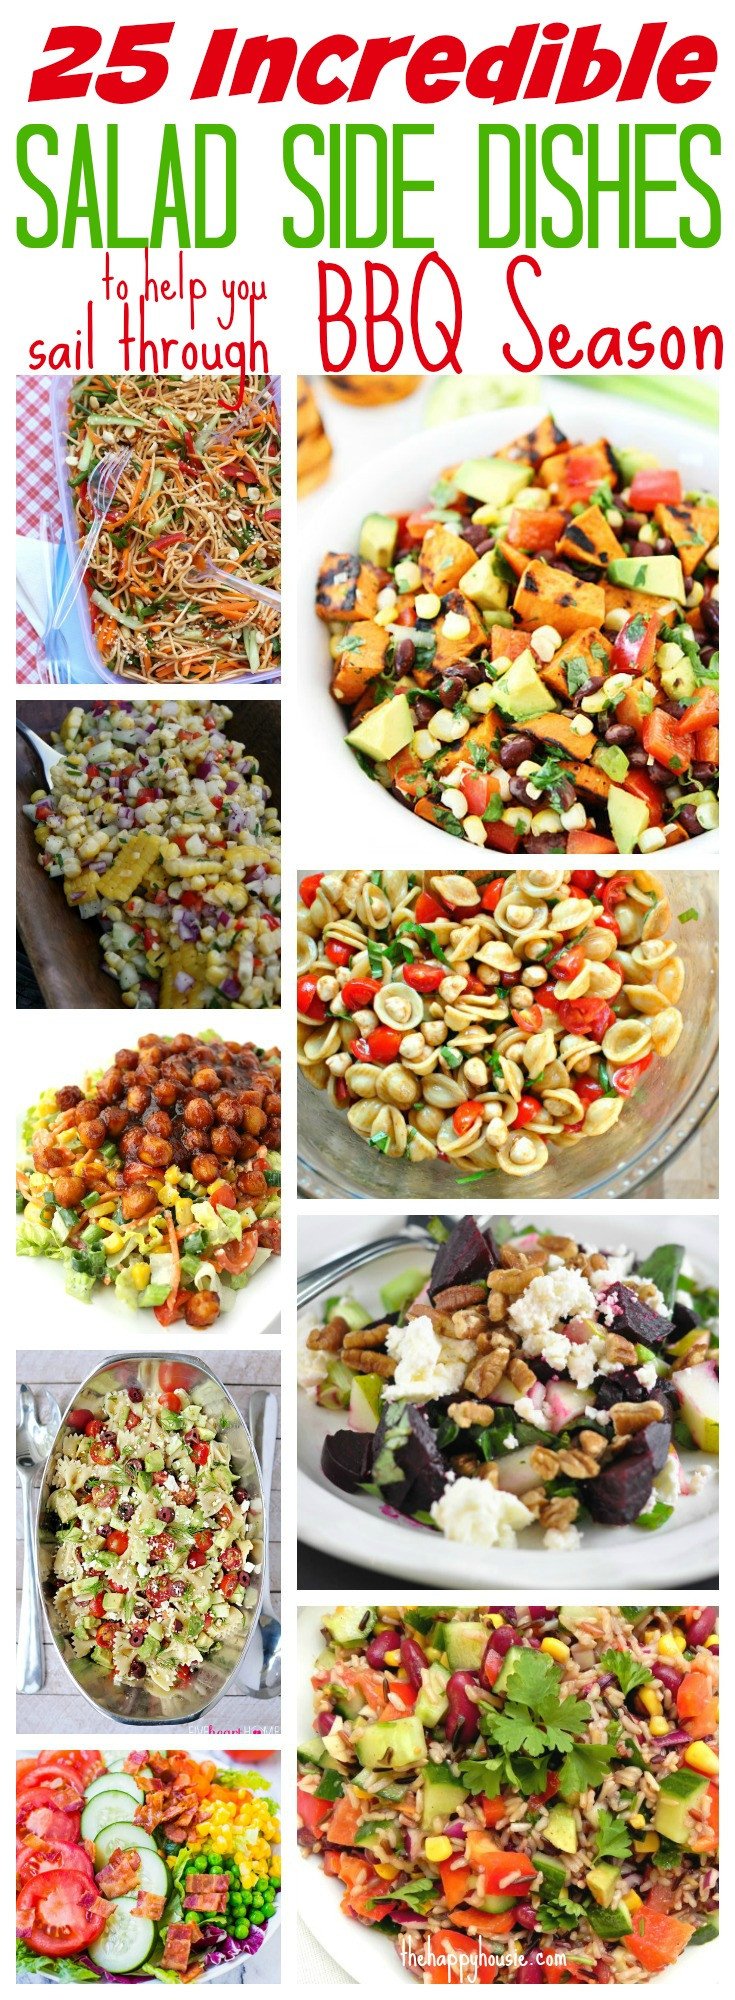 Side Dishes To Bring To A Party
 25 Incredible Crowd Pleasing BBQ Salad Side Dishes to Help